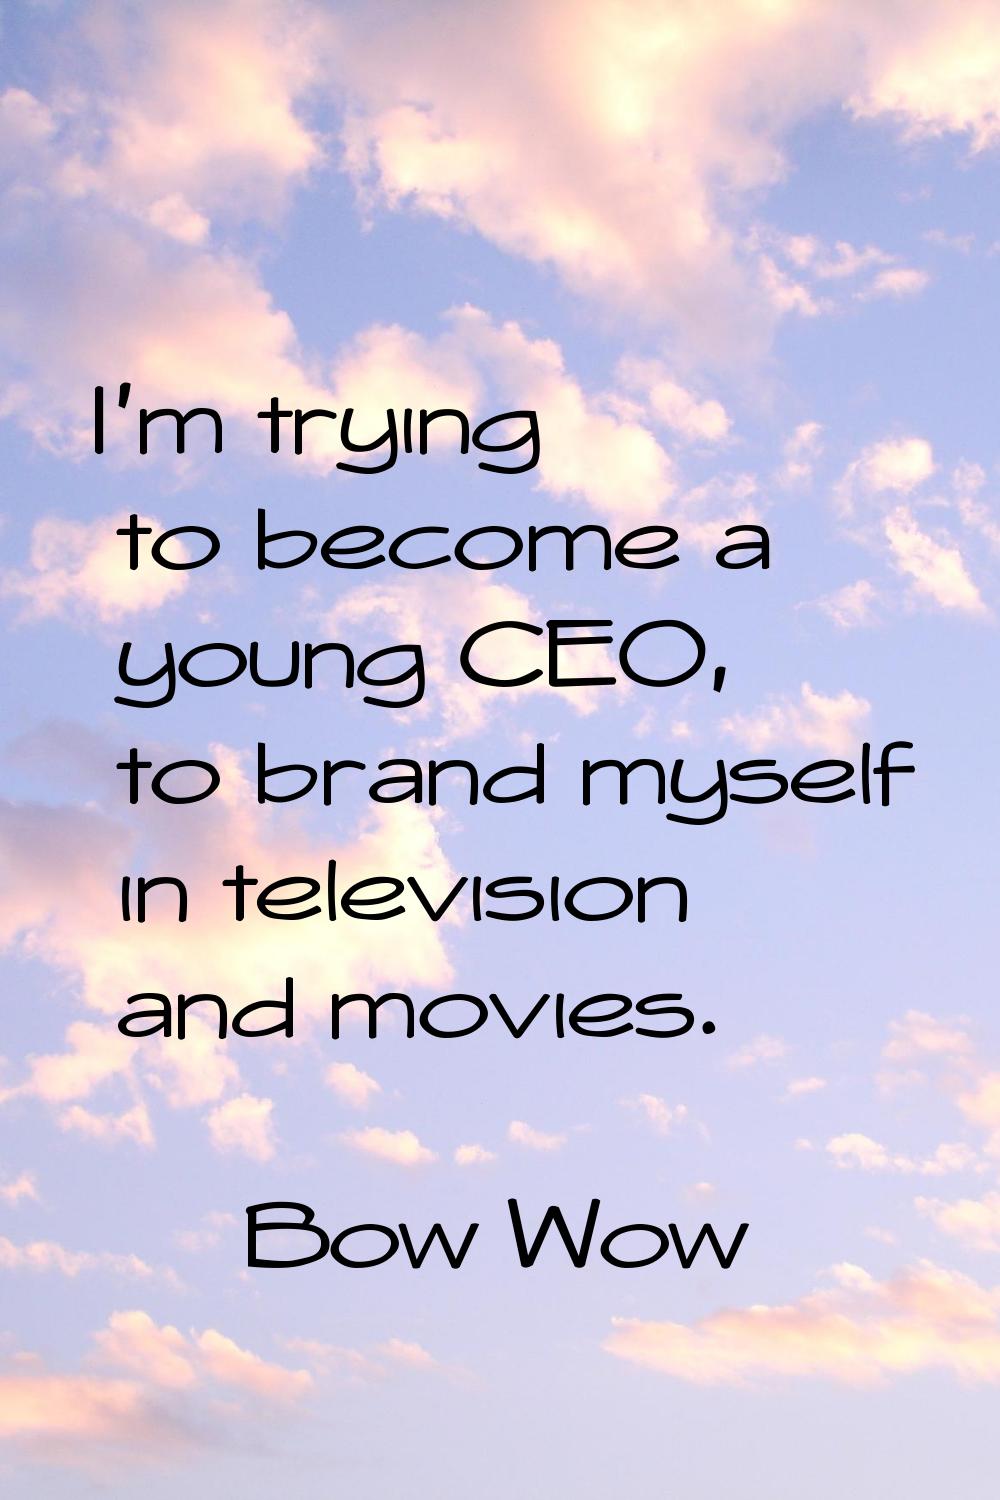 I'm trying to become a young CEO, to brand myself in television and movies.